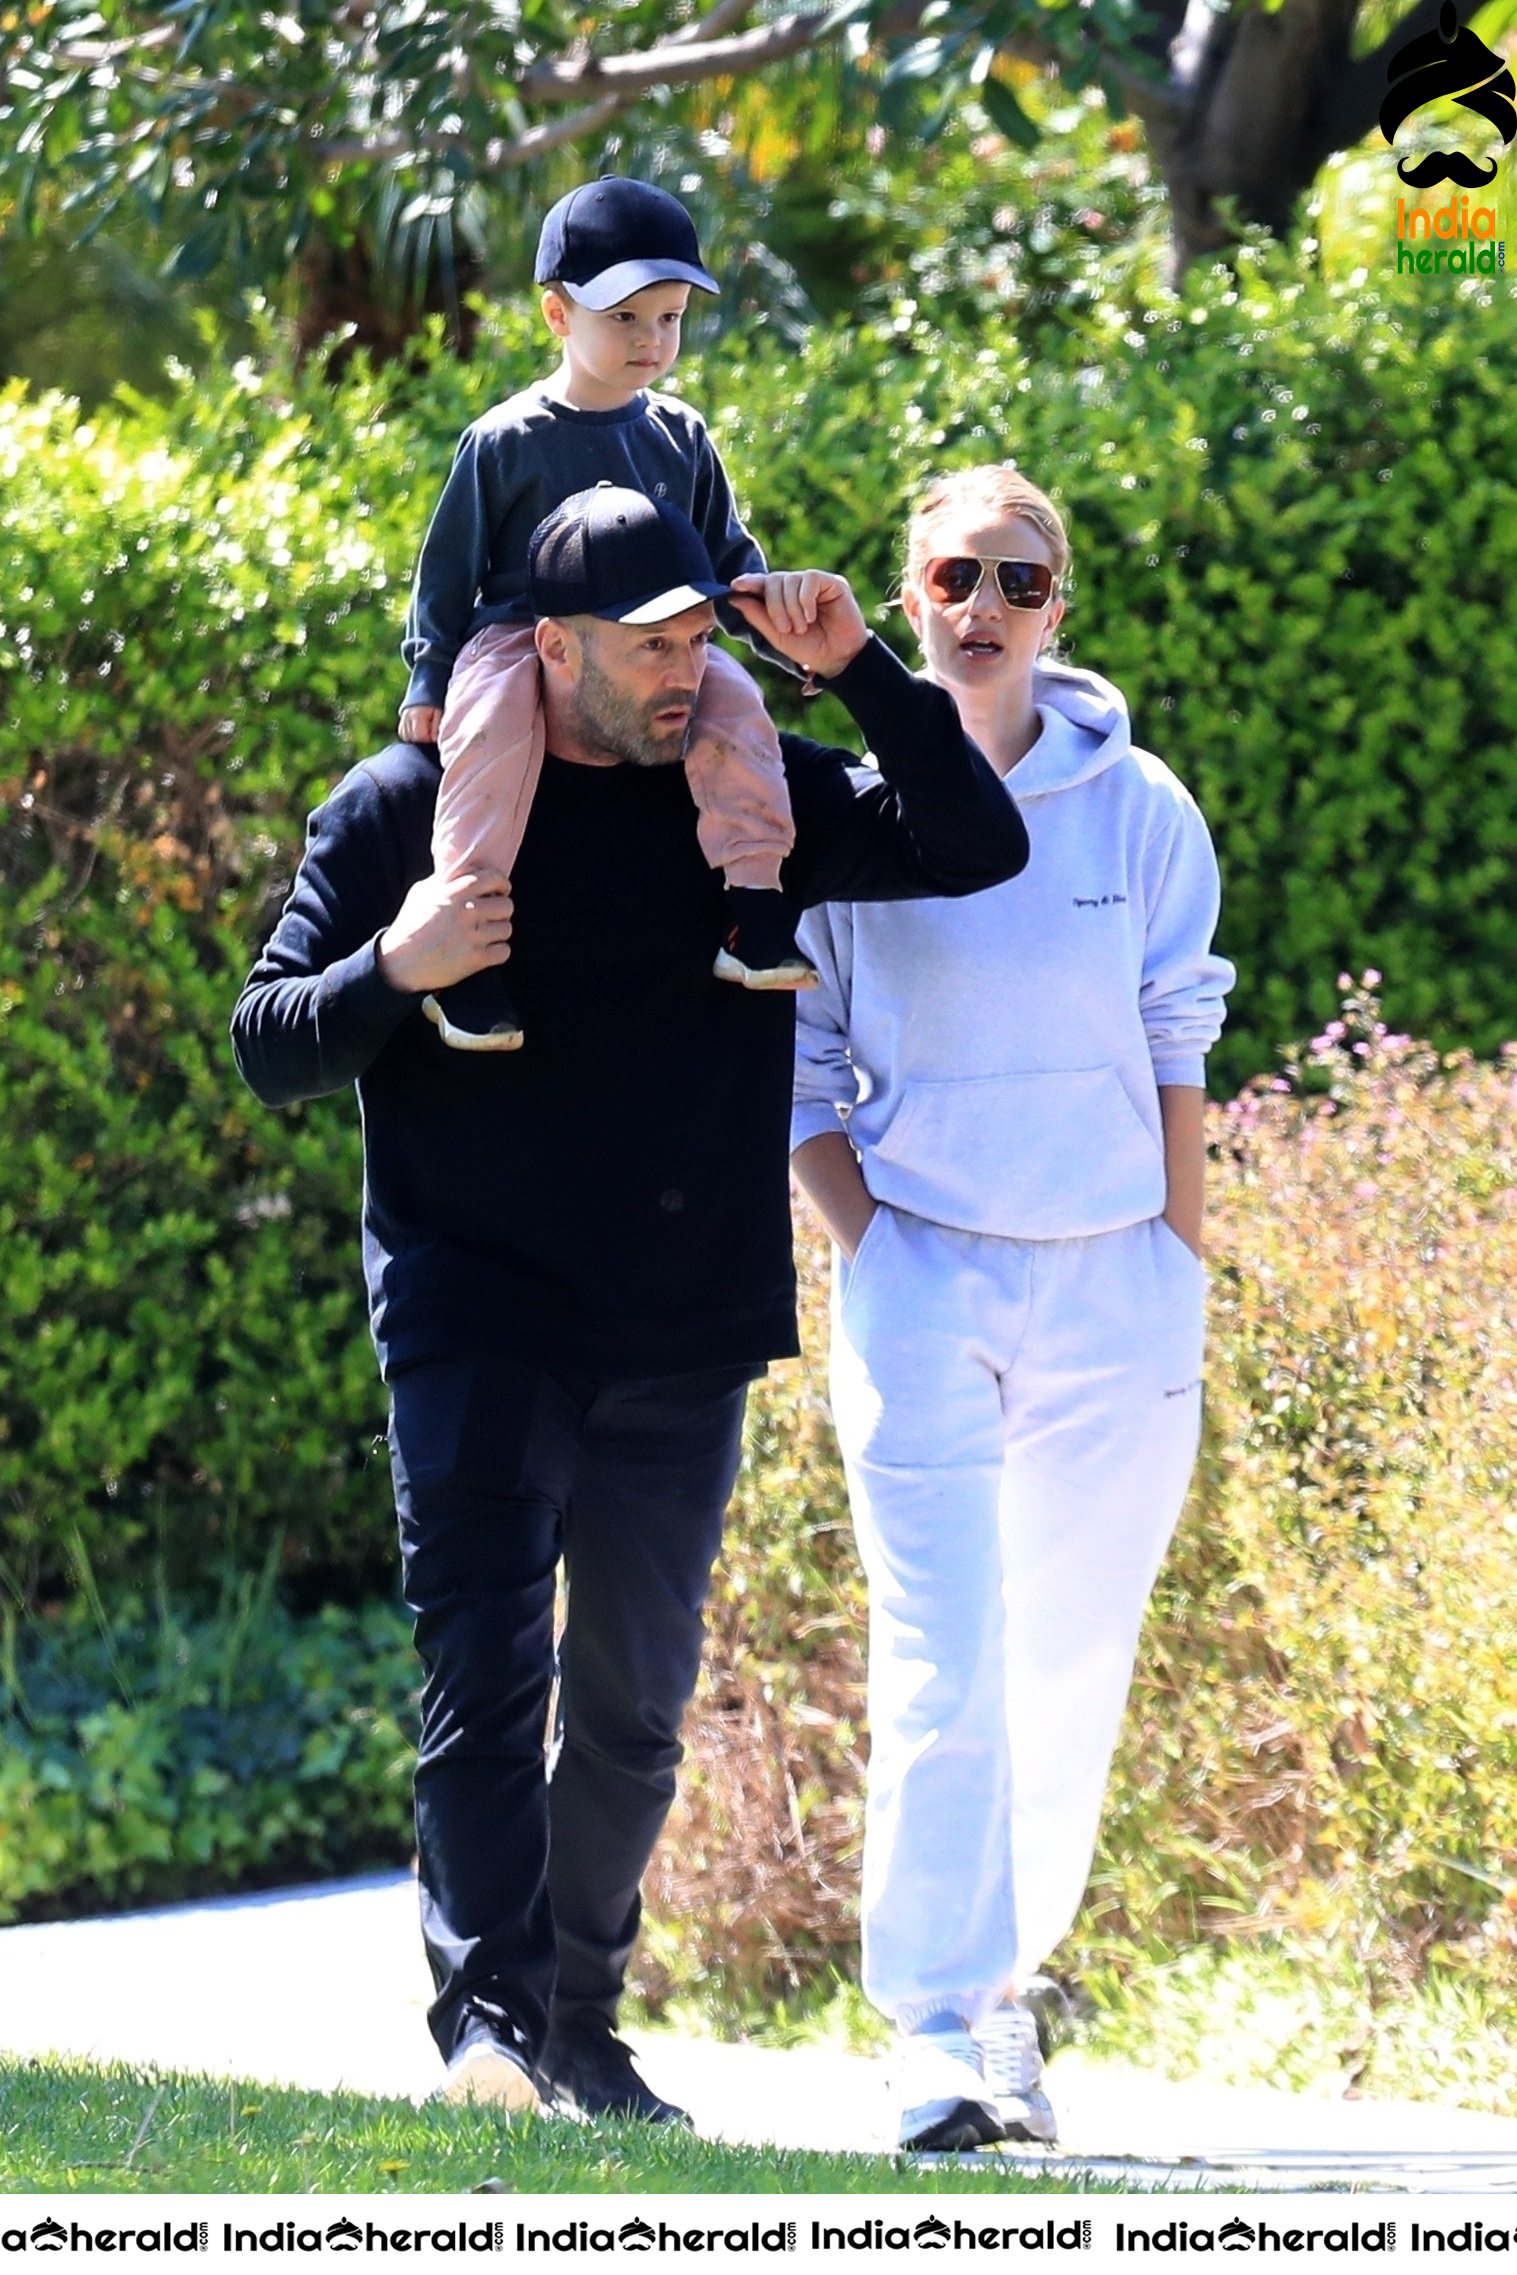 Rosie Huntington Whiteley takes a walk out with husband Jason Statham and her kid in Beverly Hills